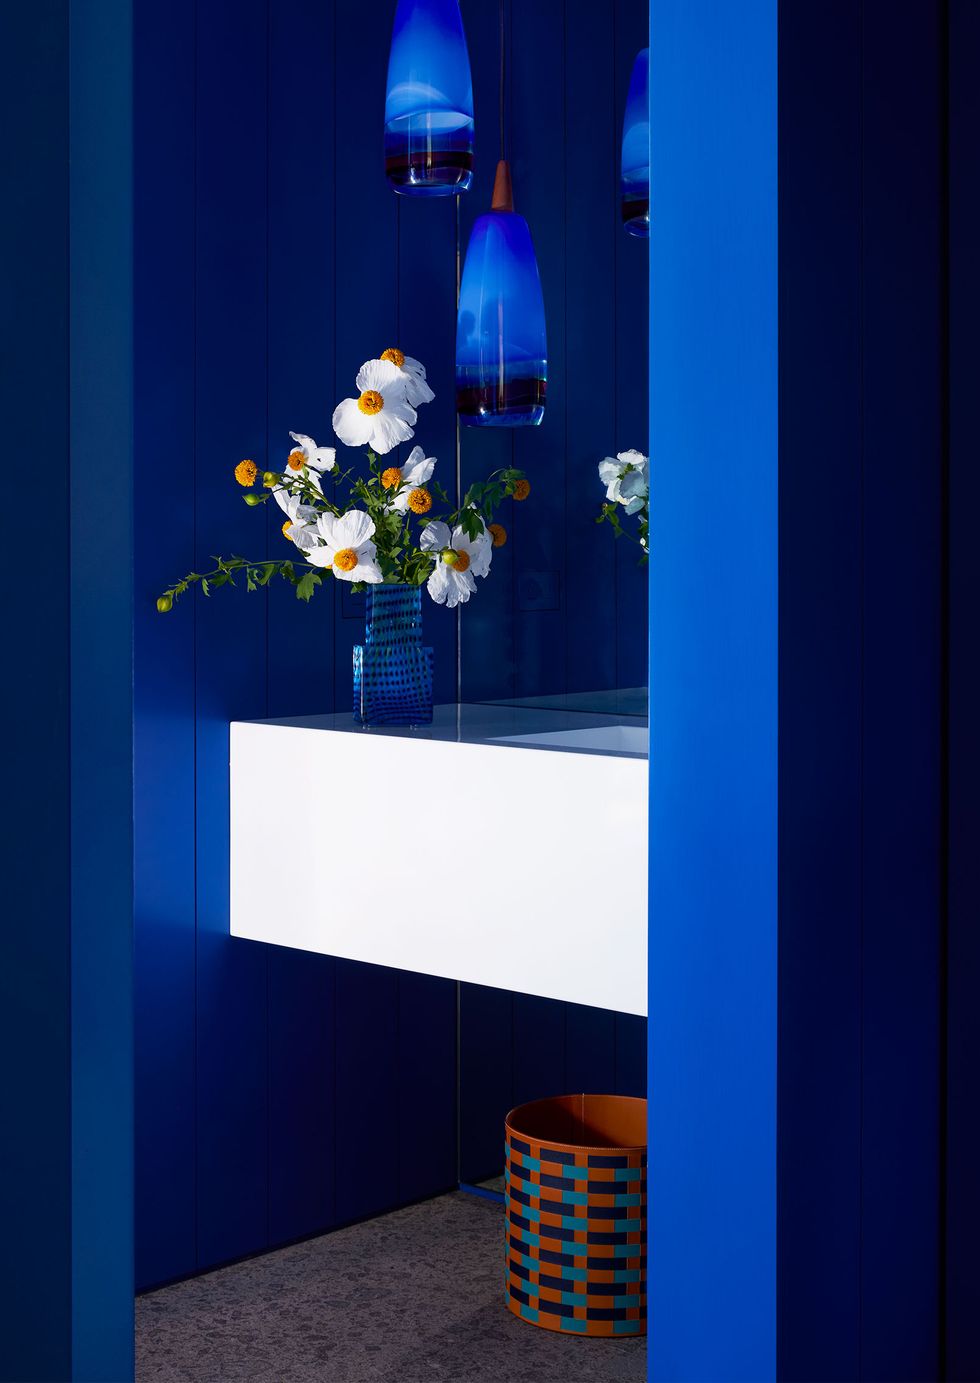 a powder room is painted in a deep but bright blue, a blue vase with white and orange flowers sits on a white sink, three glass oblong pendants hang over the sink, a pop art basket sits under the sink